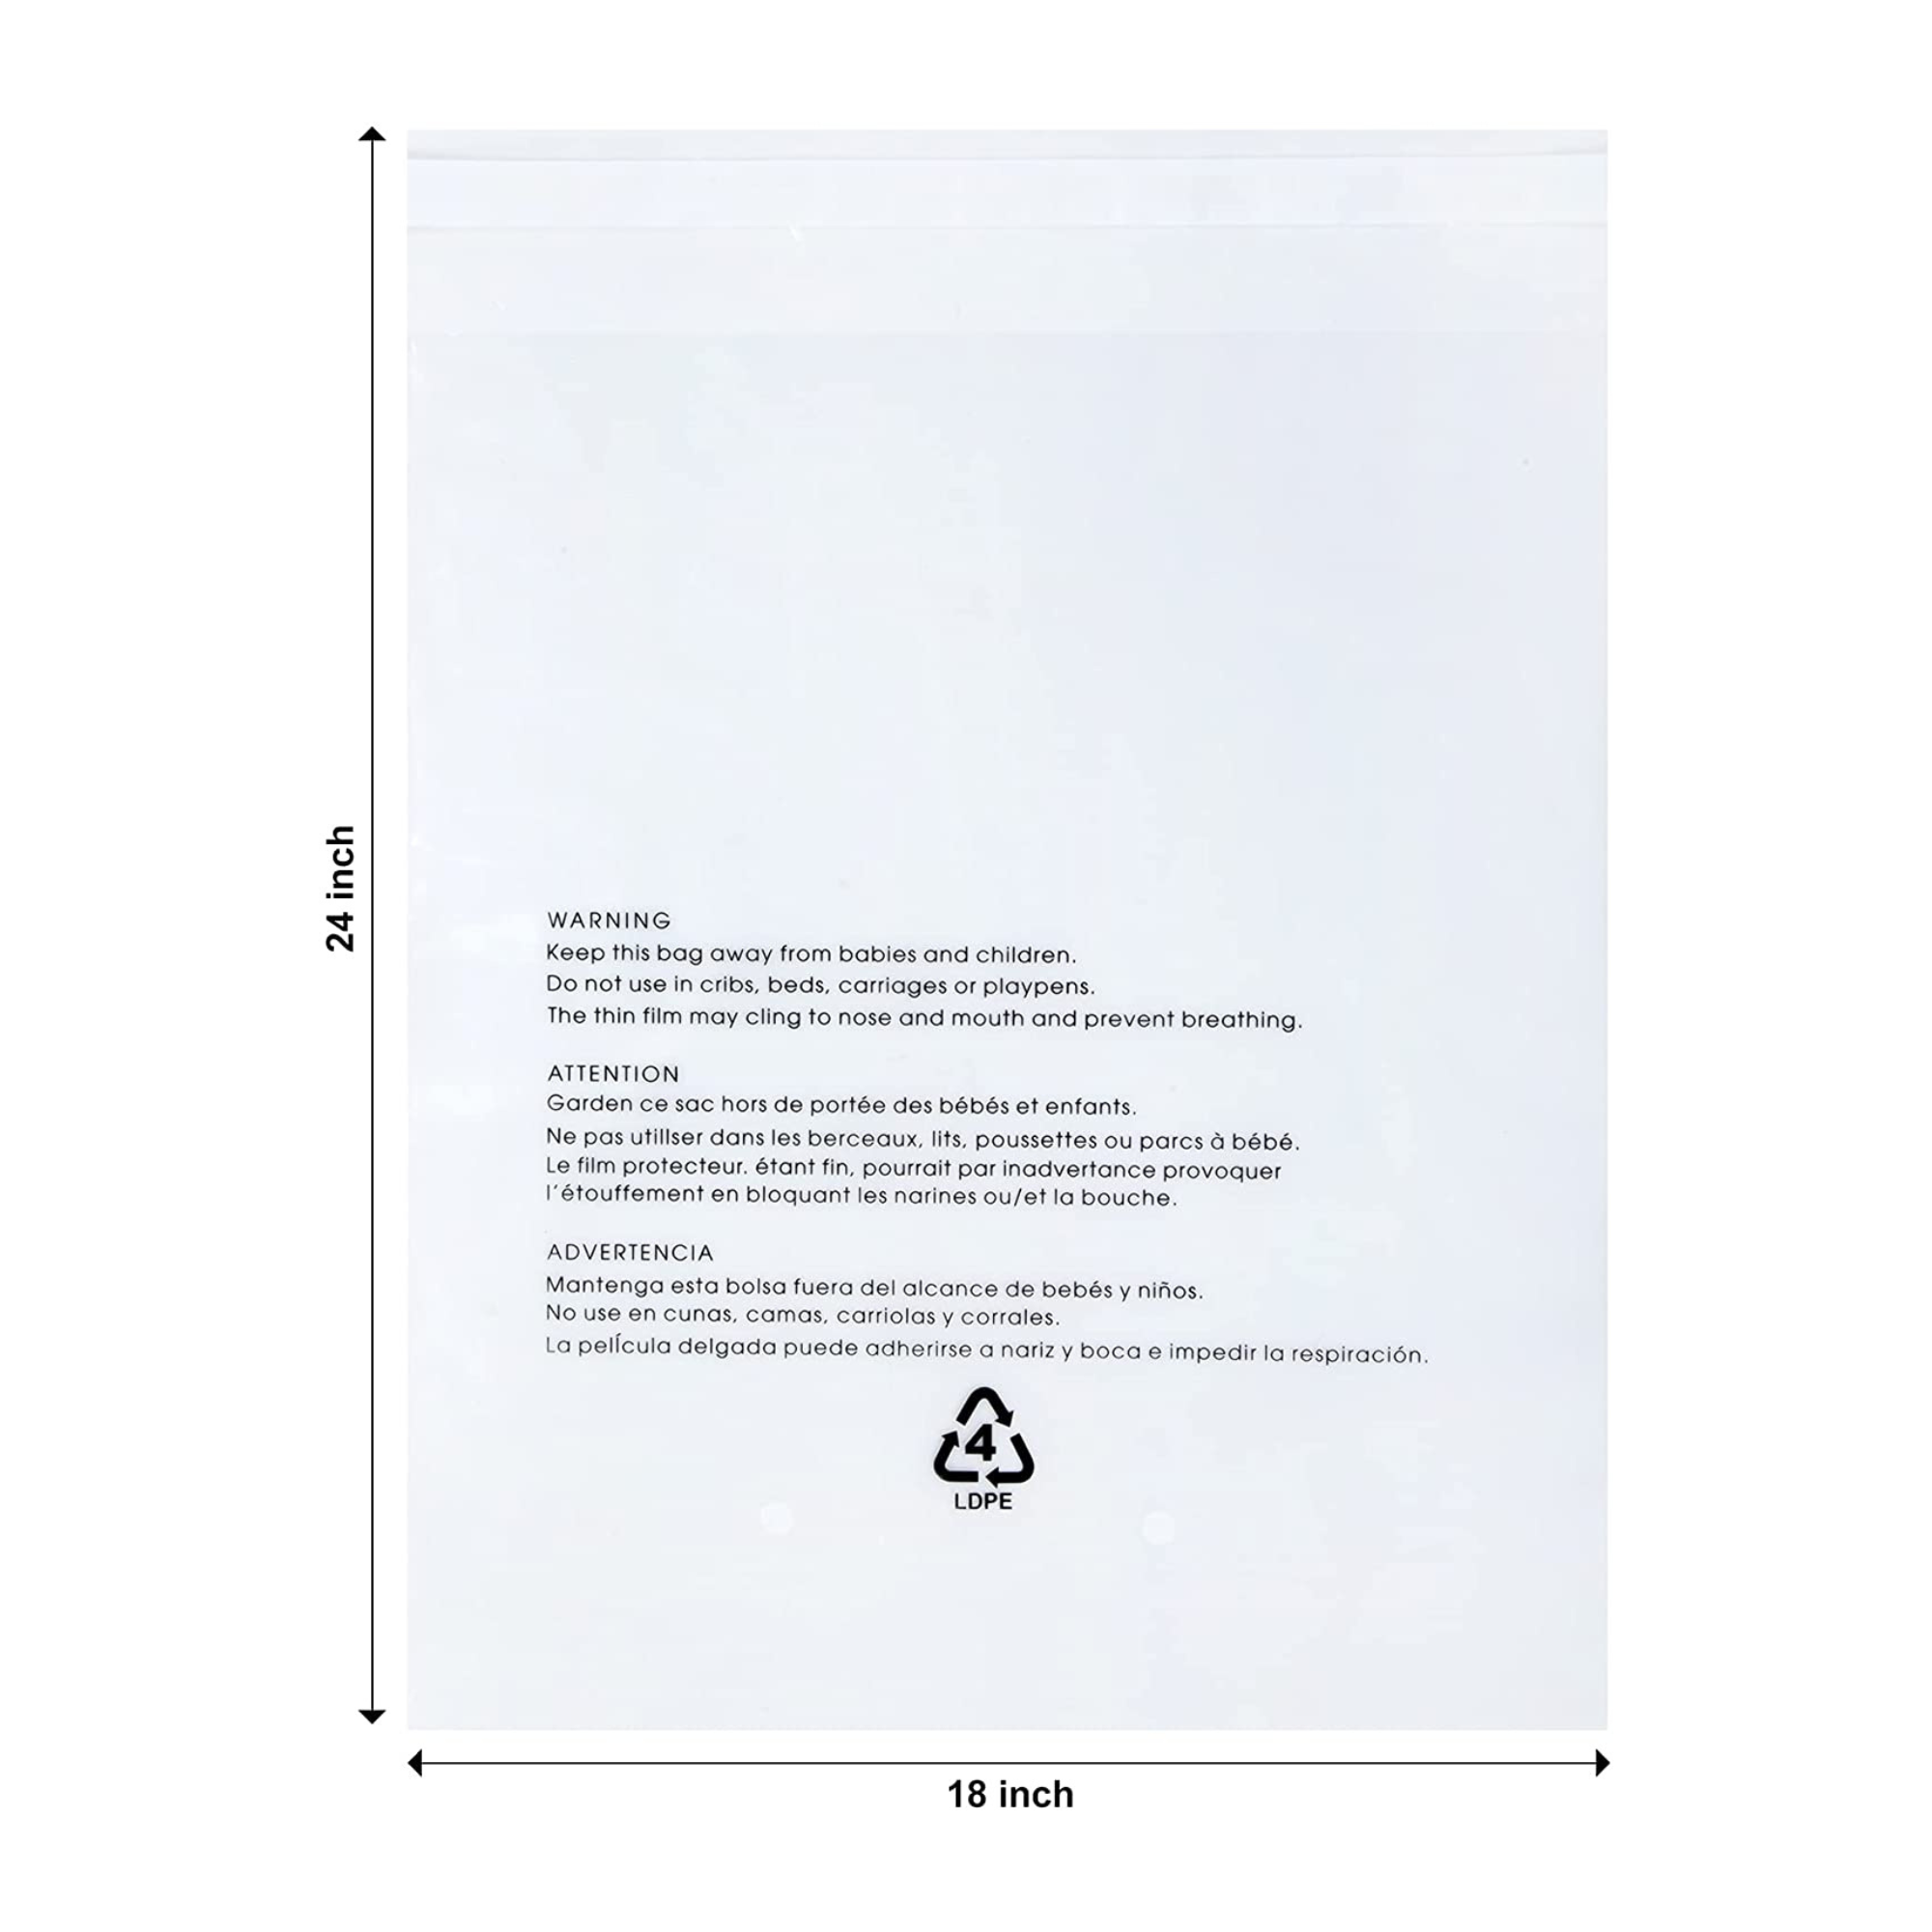 18x24 Industrial Clear Plastic Poly Bags With Permanent Self Seal - 1.5 Mil Suffocation Warning Bags For Packaging, Shipping & FBA - 200 Pcs - Infinite Pack